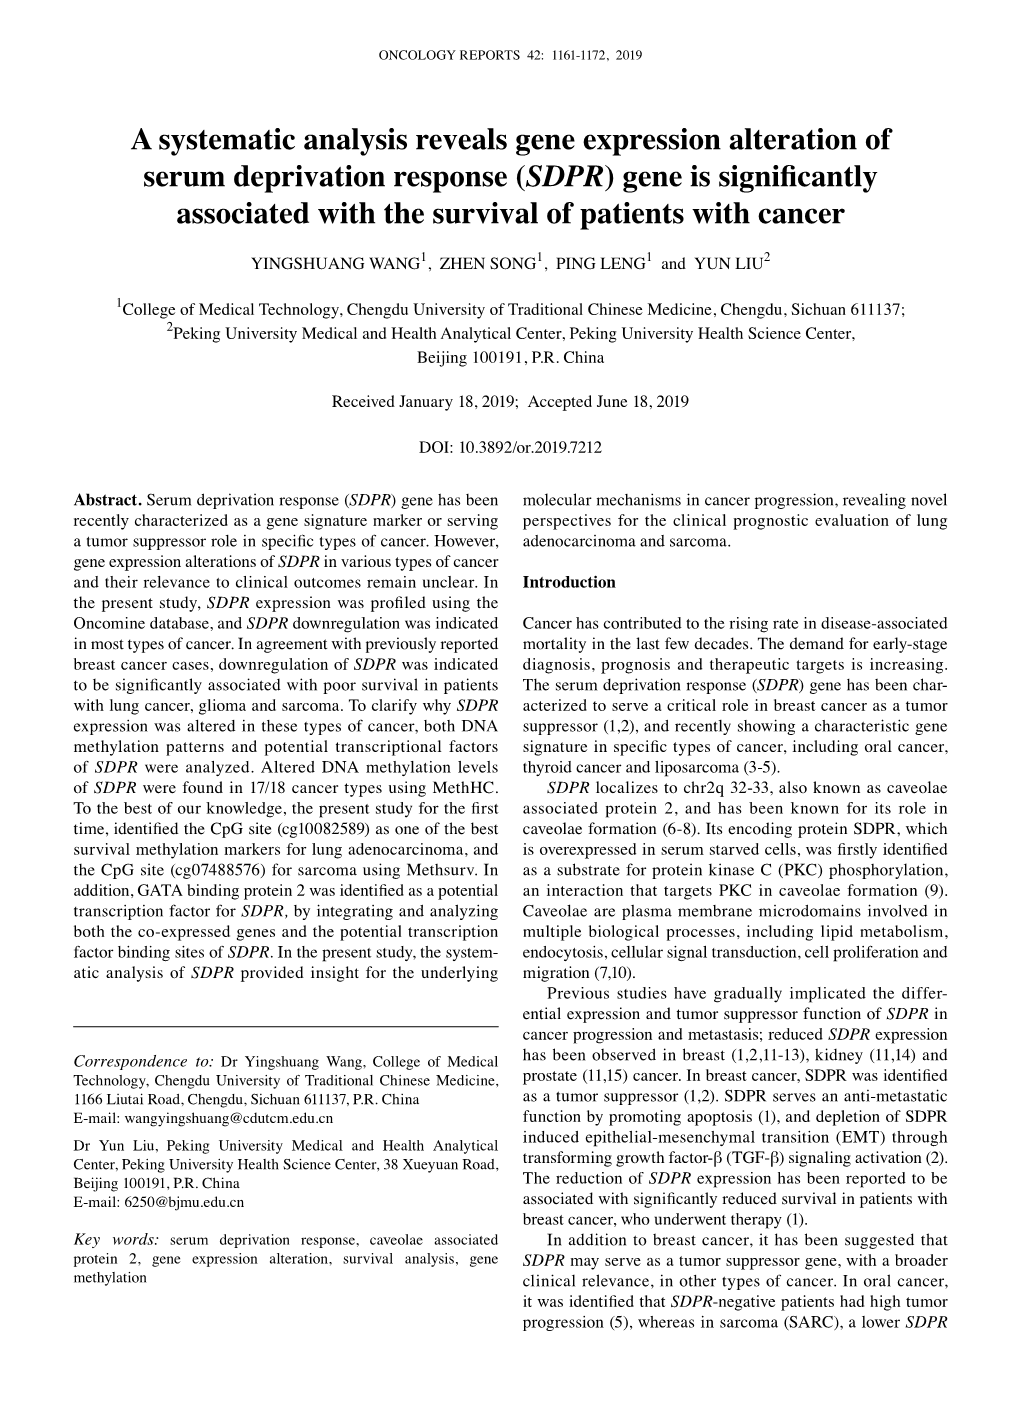 (SDPR) Gene Is Significantly Associated with the Survival of Patients with Cancer